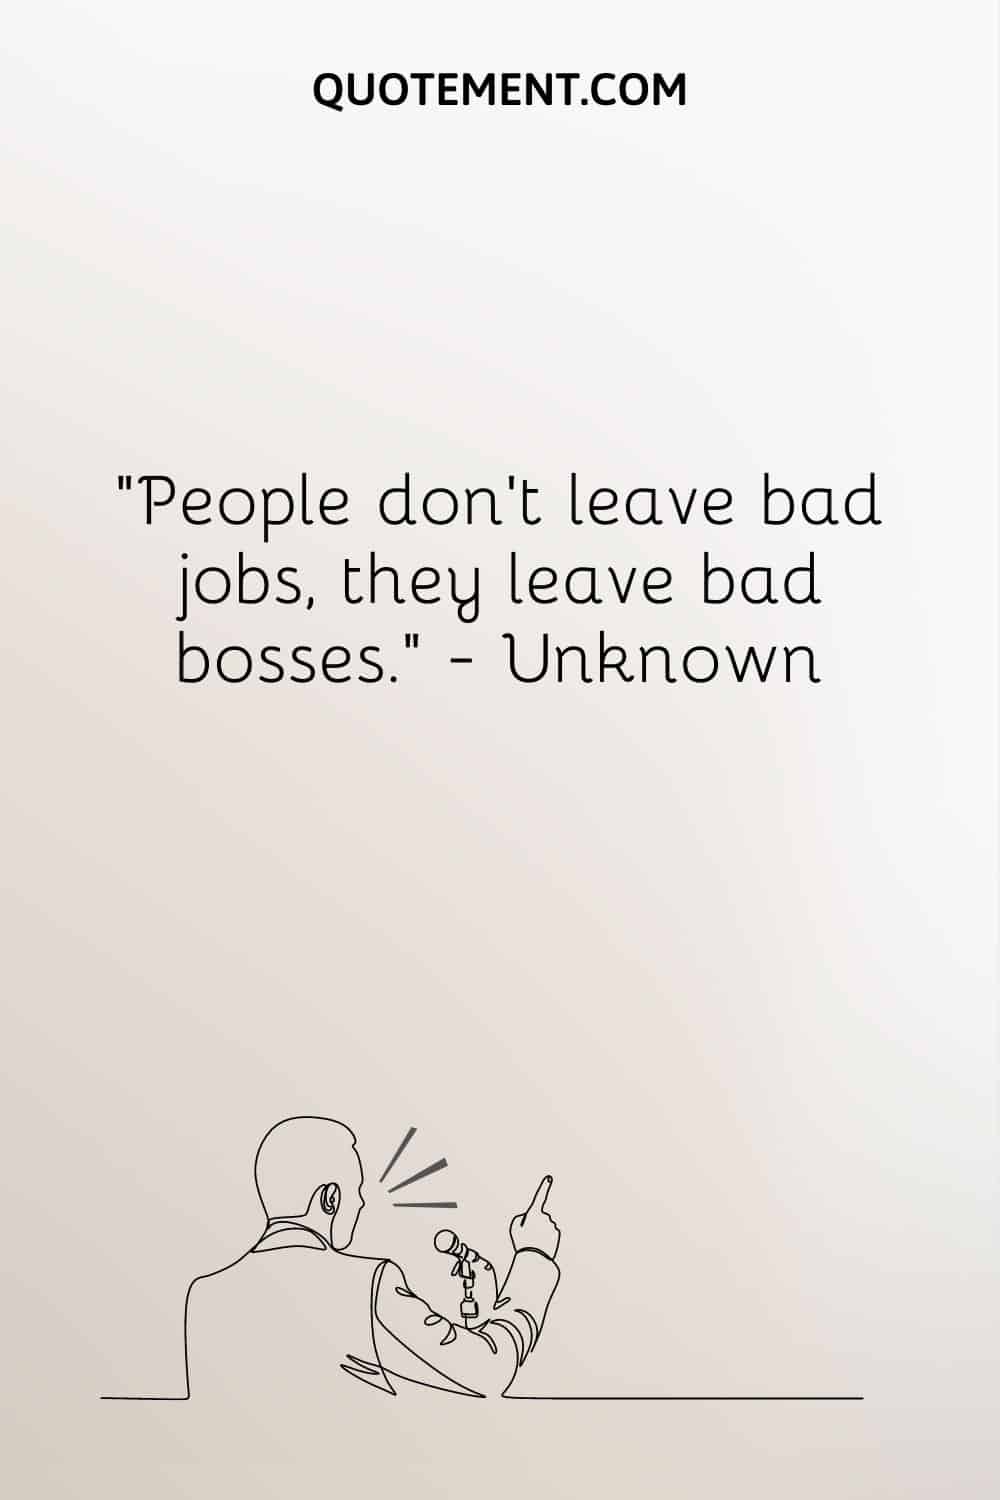 People don’t leave bad jobs, they leave bad bosses